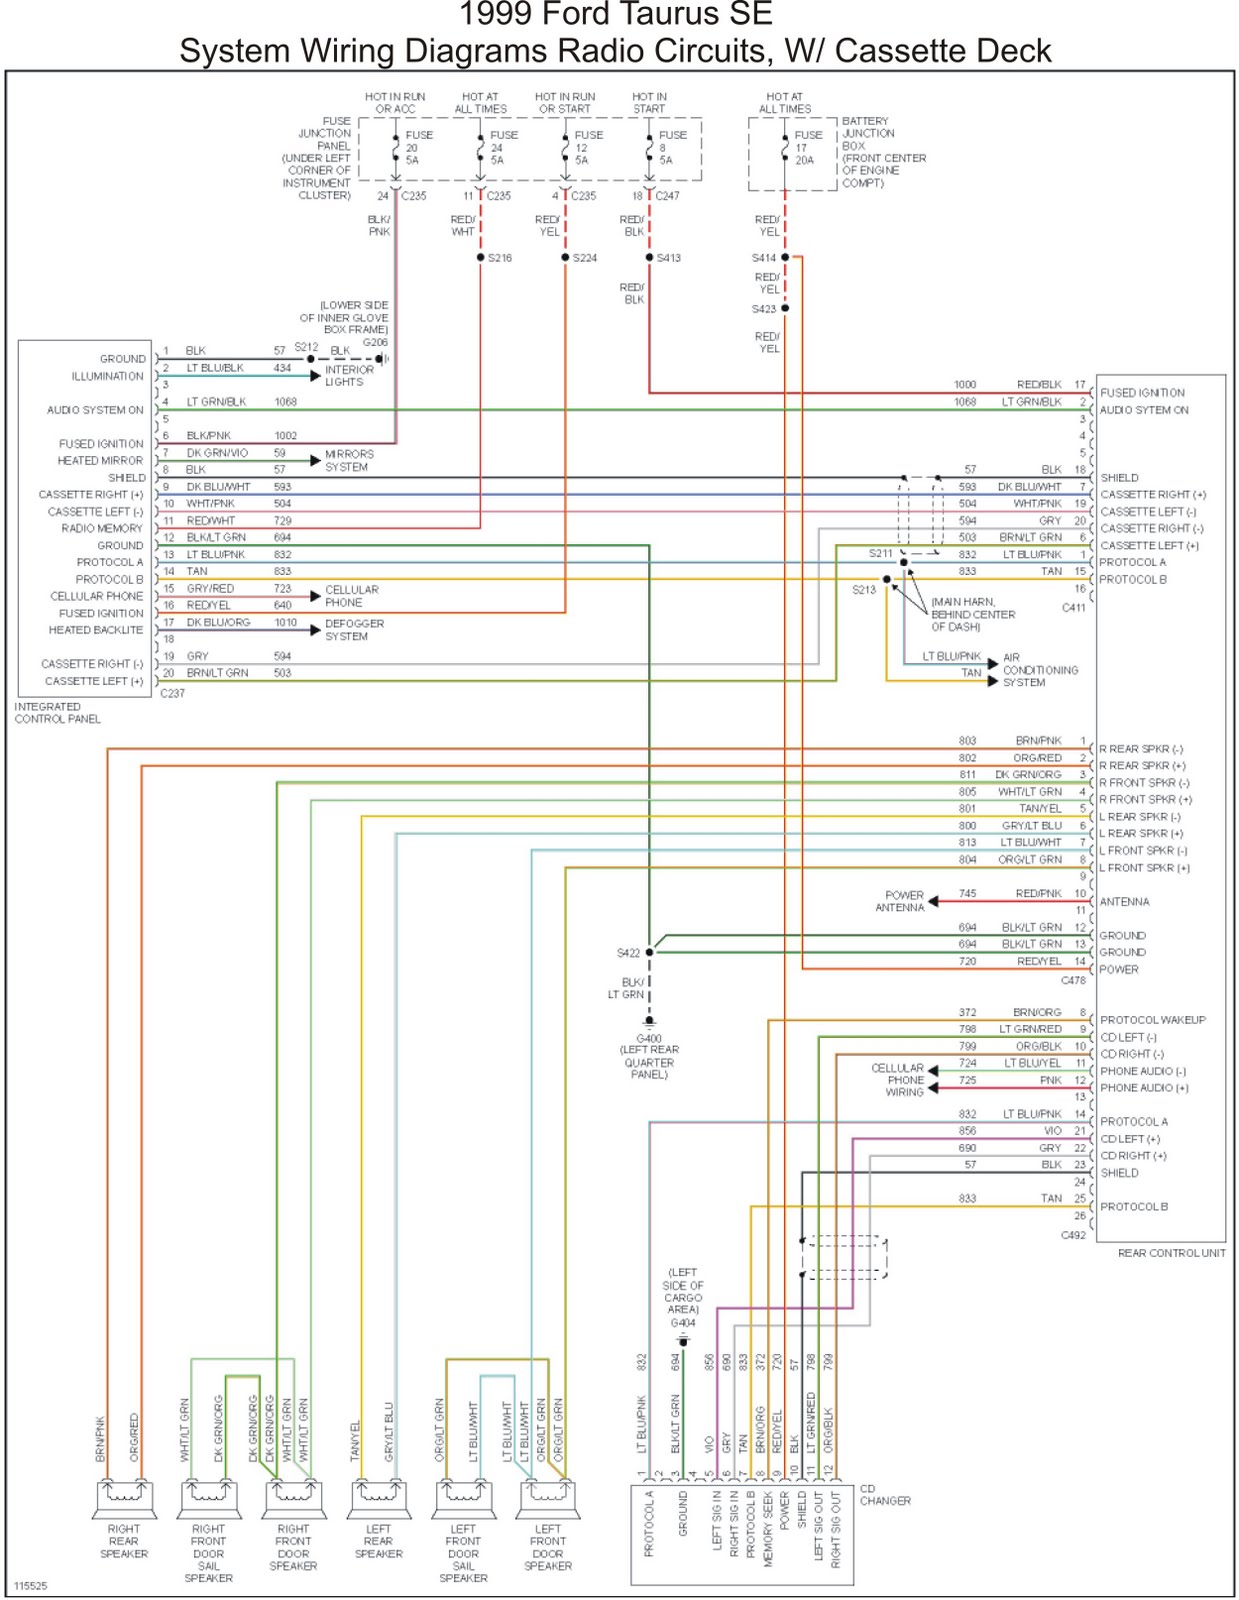 2006 Ford Escape Radio Wiring Diagram from 3.bp.blogspot.com